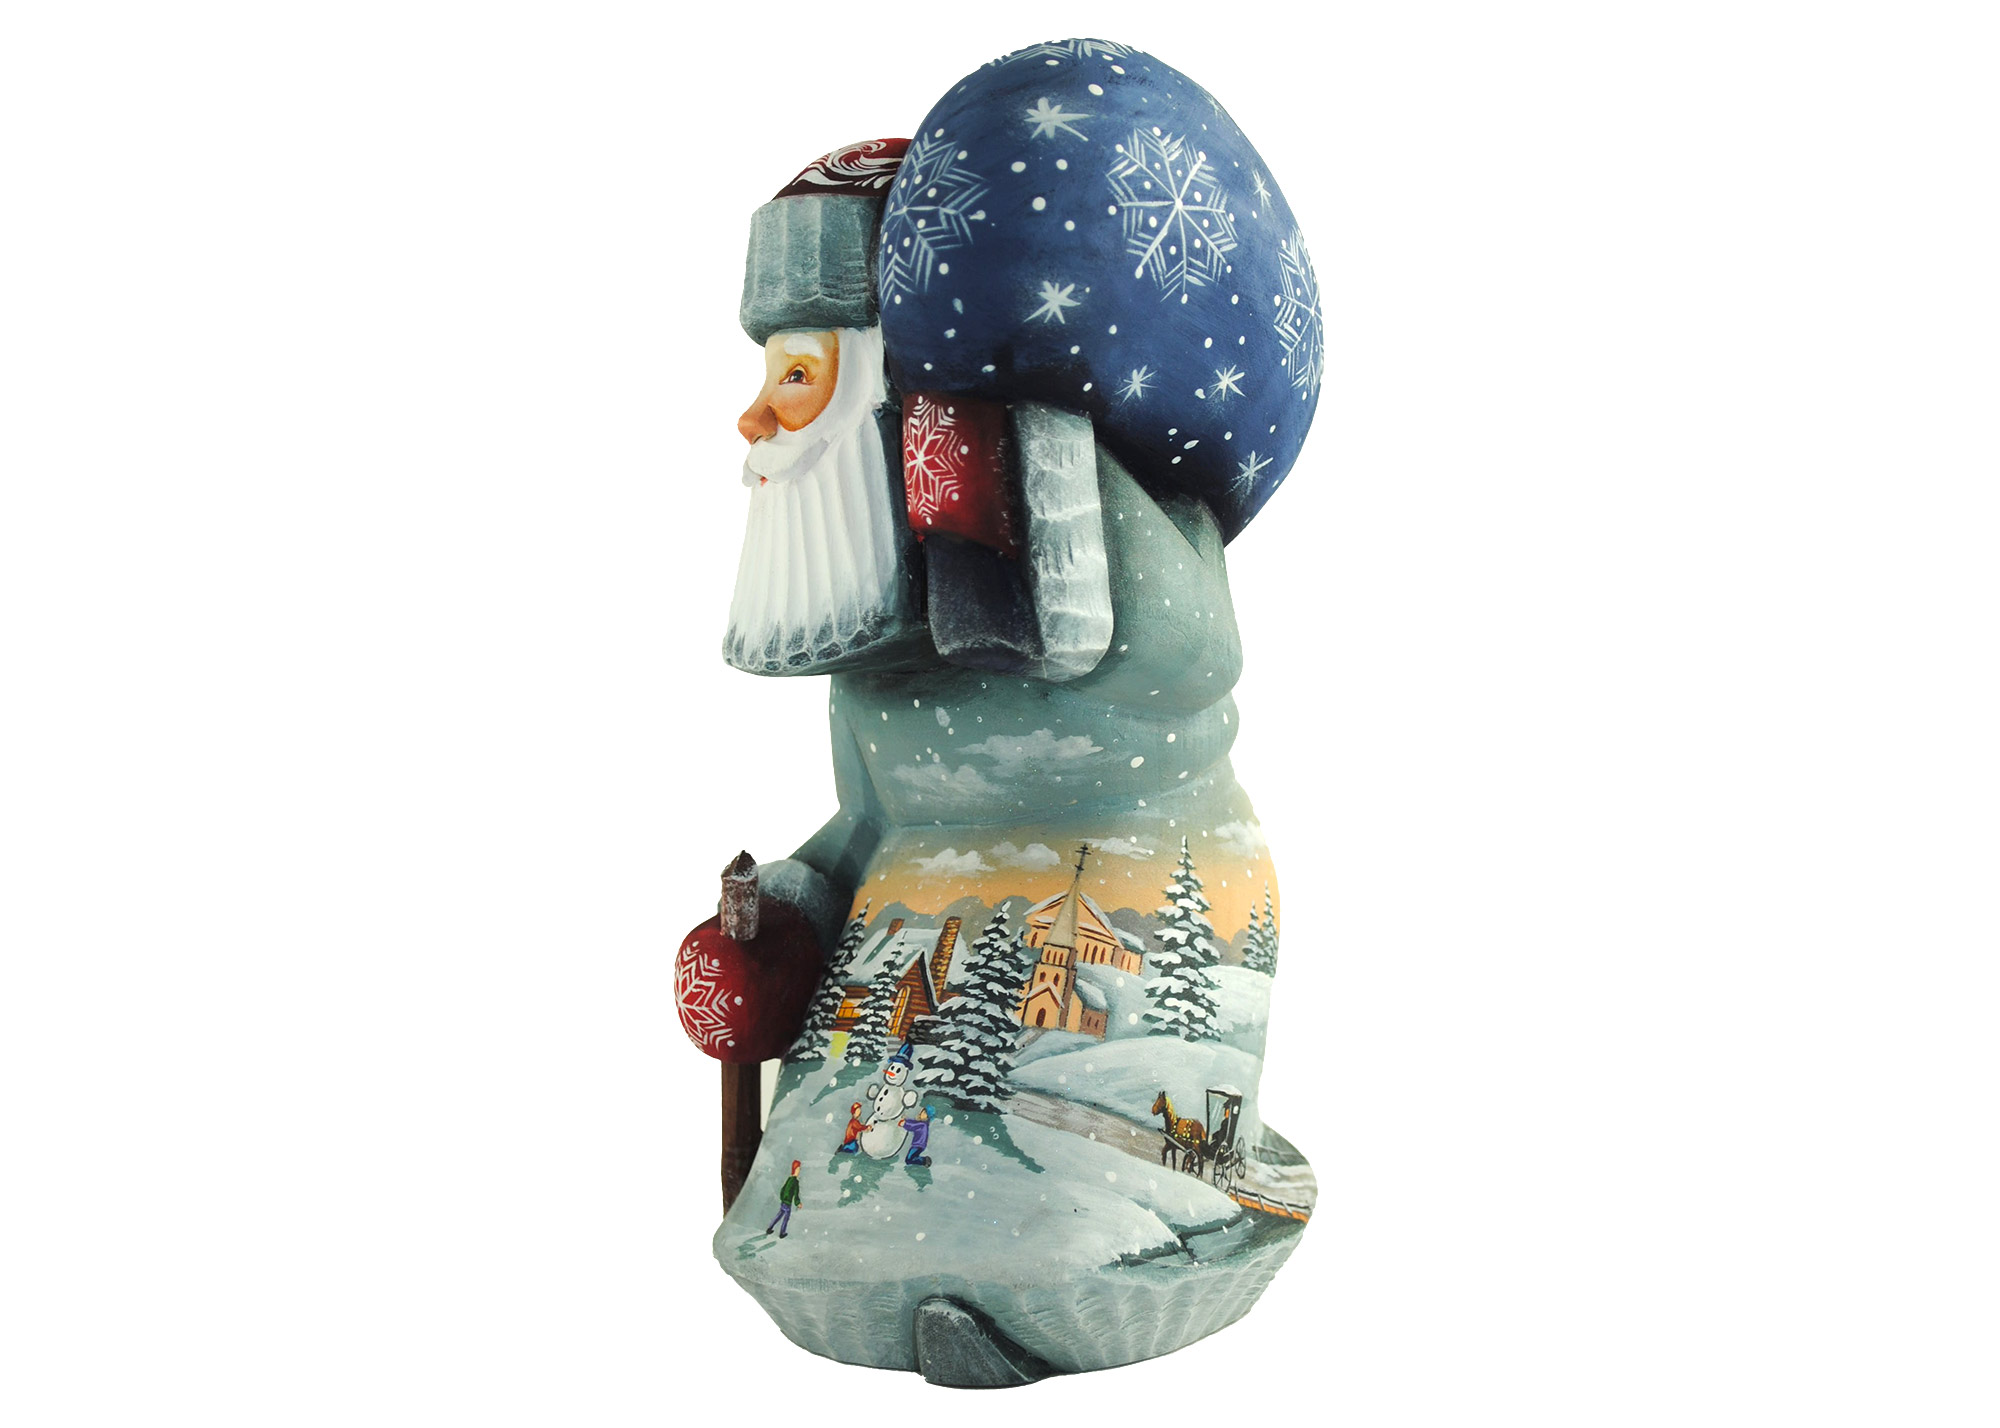 Buy Peaceful Village "Snow Play" Father Frost Carving at GoldenCockerel.com